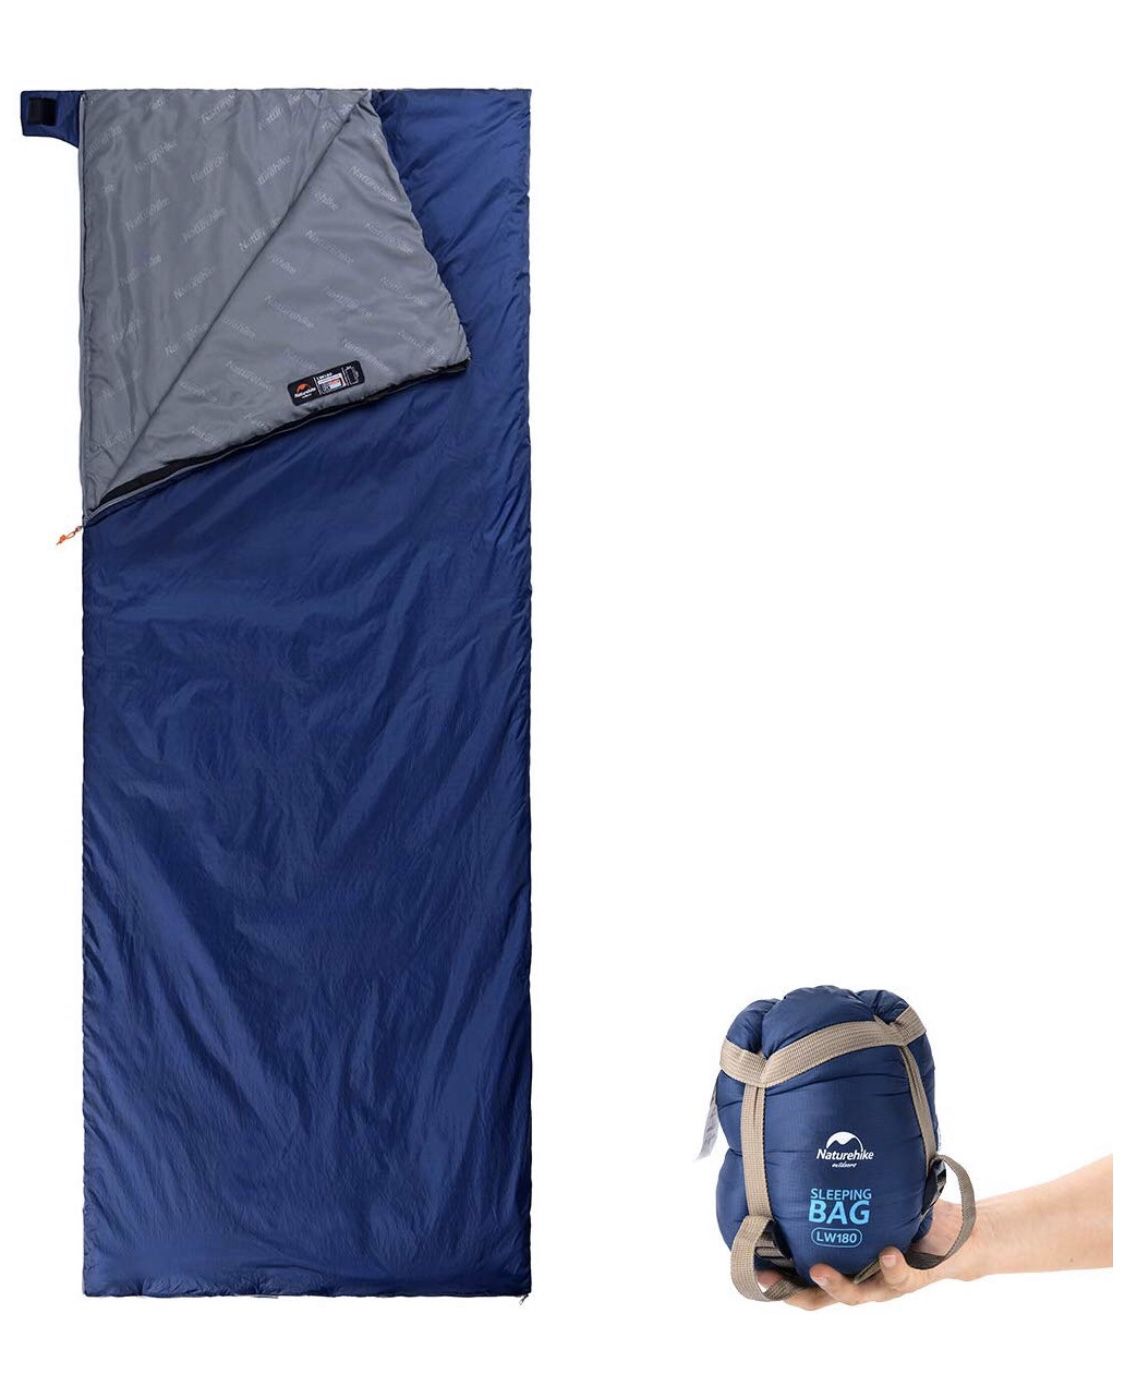 Naturehike Sleeping Bag – Envelope Lightweight Portable, Waterproof, Comfort with Compression Sack - Great for 3 Season Traveling, Camping, Hiking, O